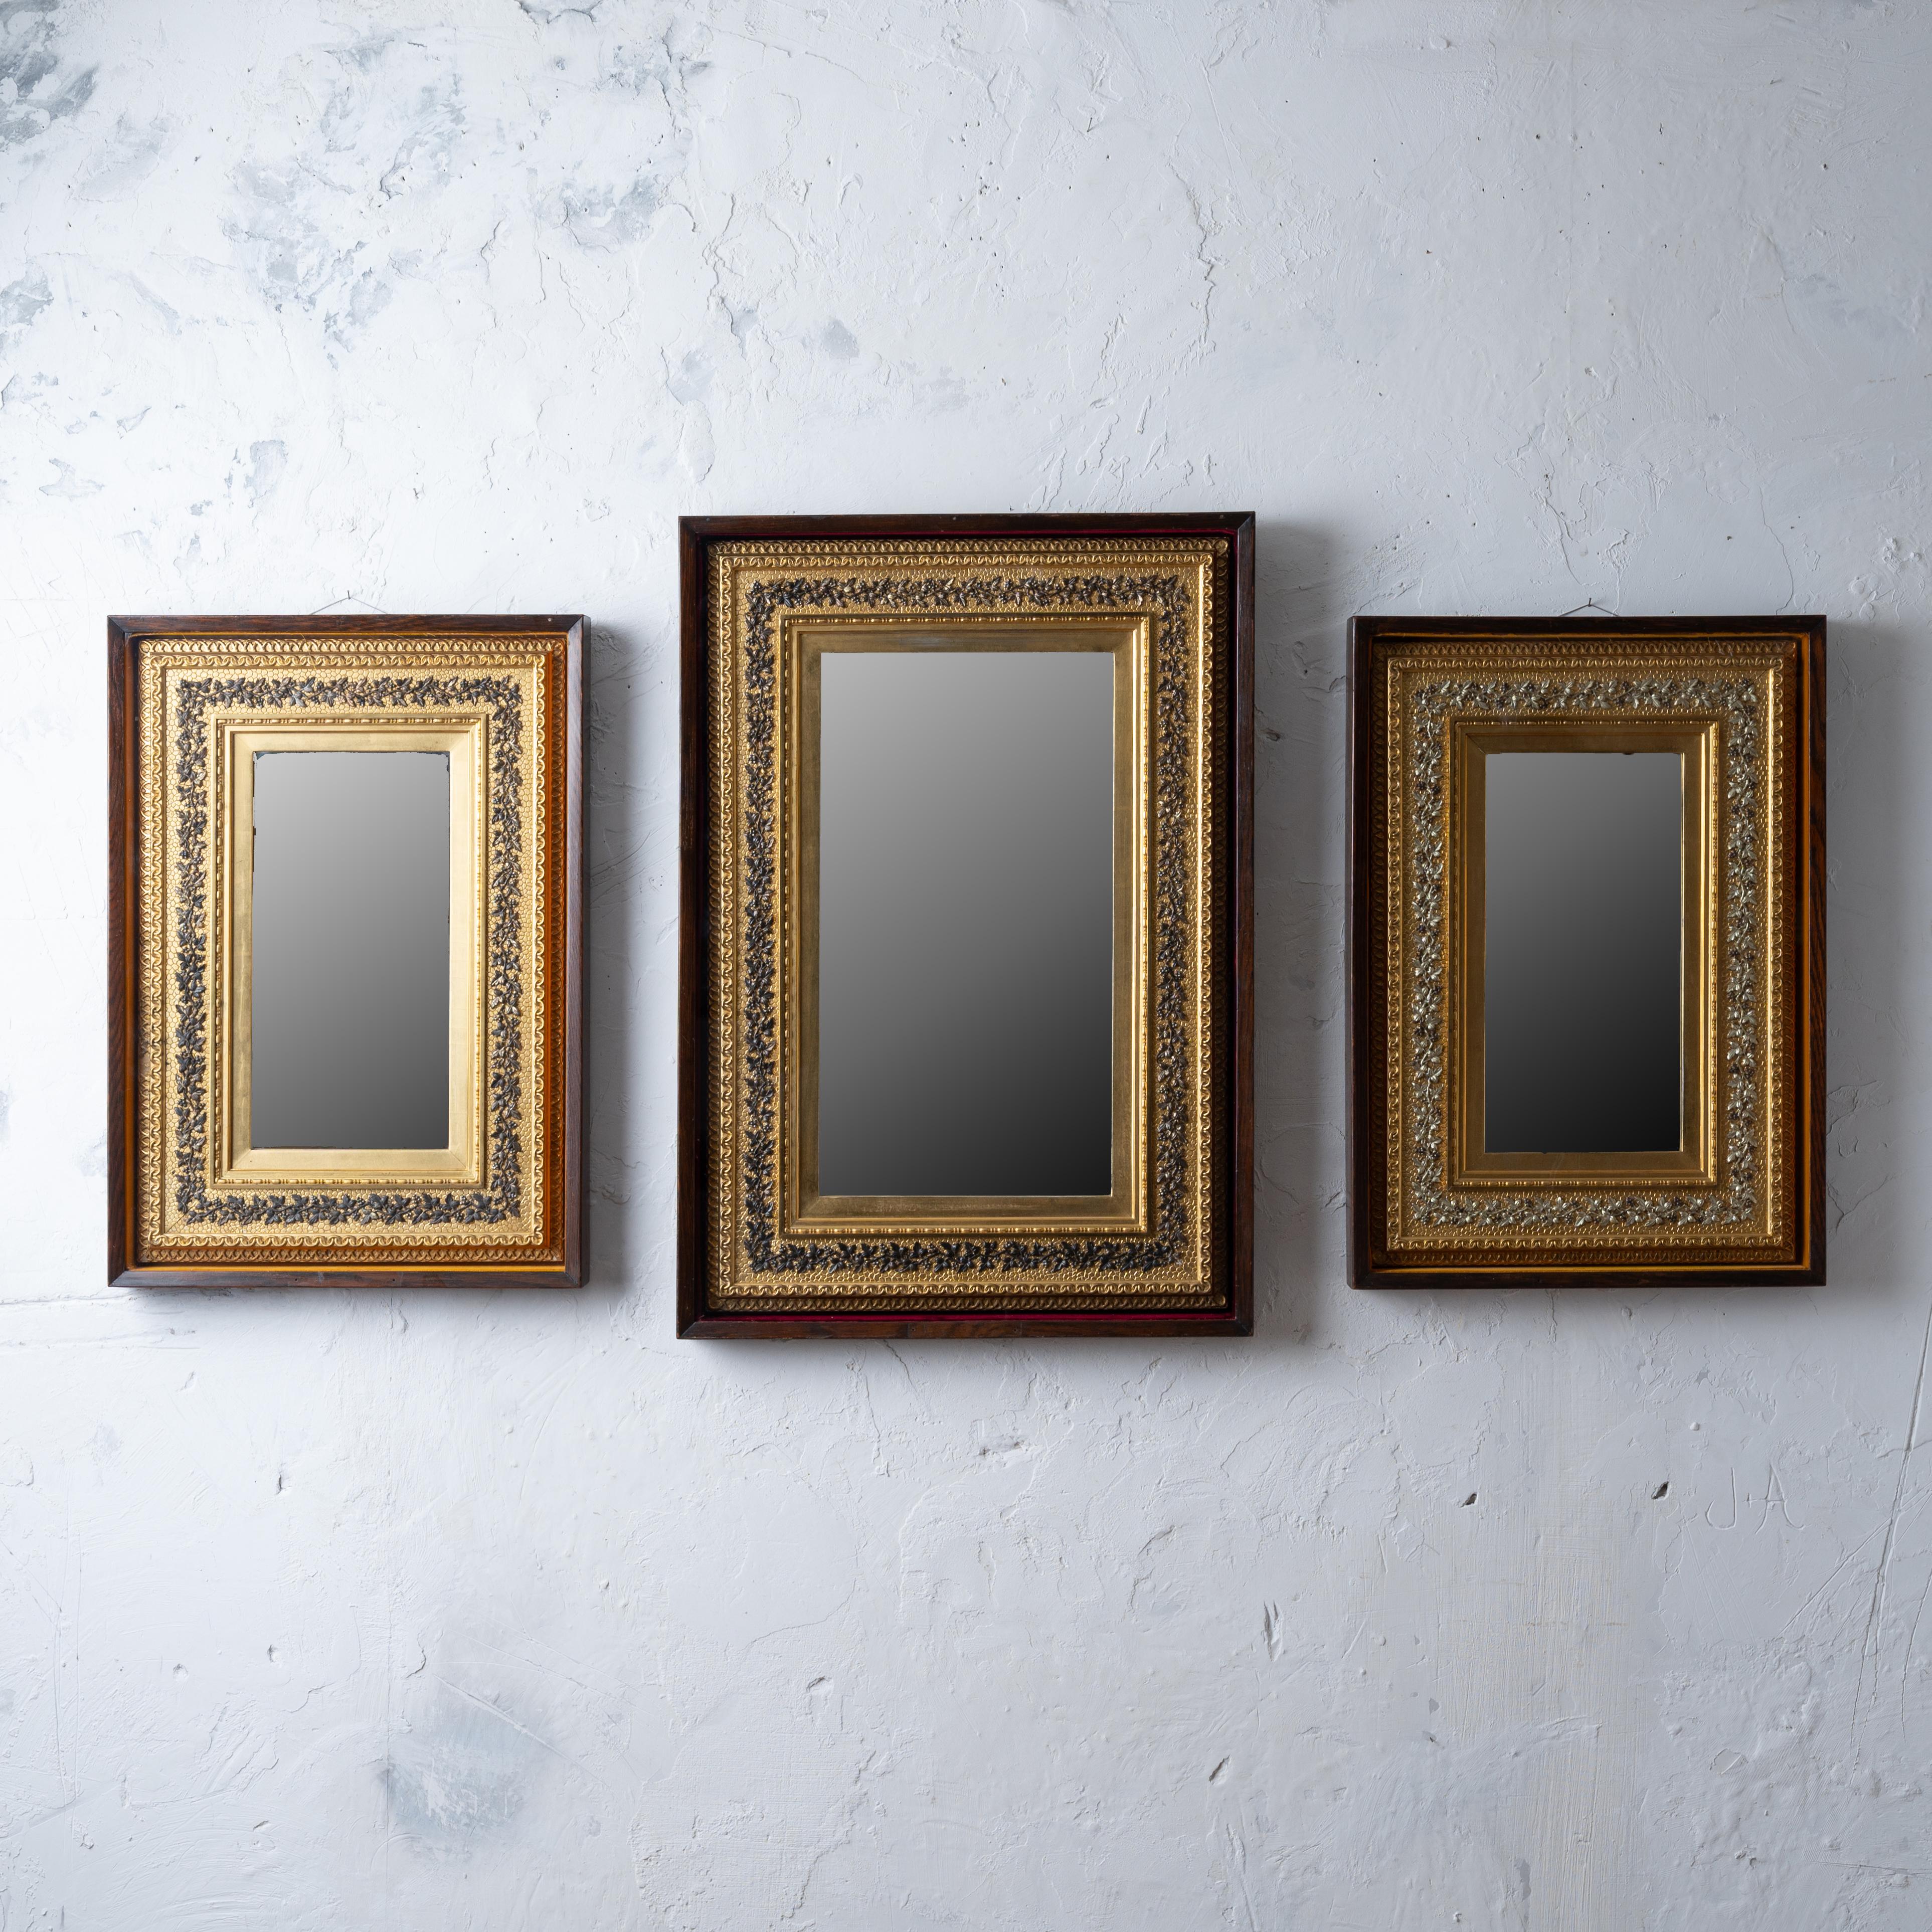 A set of three gilt framed mirrors in custom shadowbox frames, circa 1880s.  
Maker’s label remains on rear of one mirror:  A.H. Fowle’s Art Parlor of Grand Rapids.

23 ½ inches wide by 33 ½ inches tall by 2 ¼ inches deep 
19 ¼ inches wide by 27 ¼